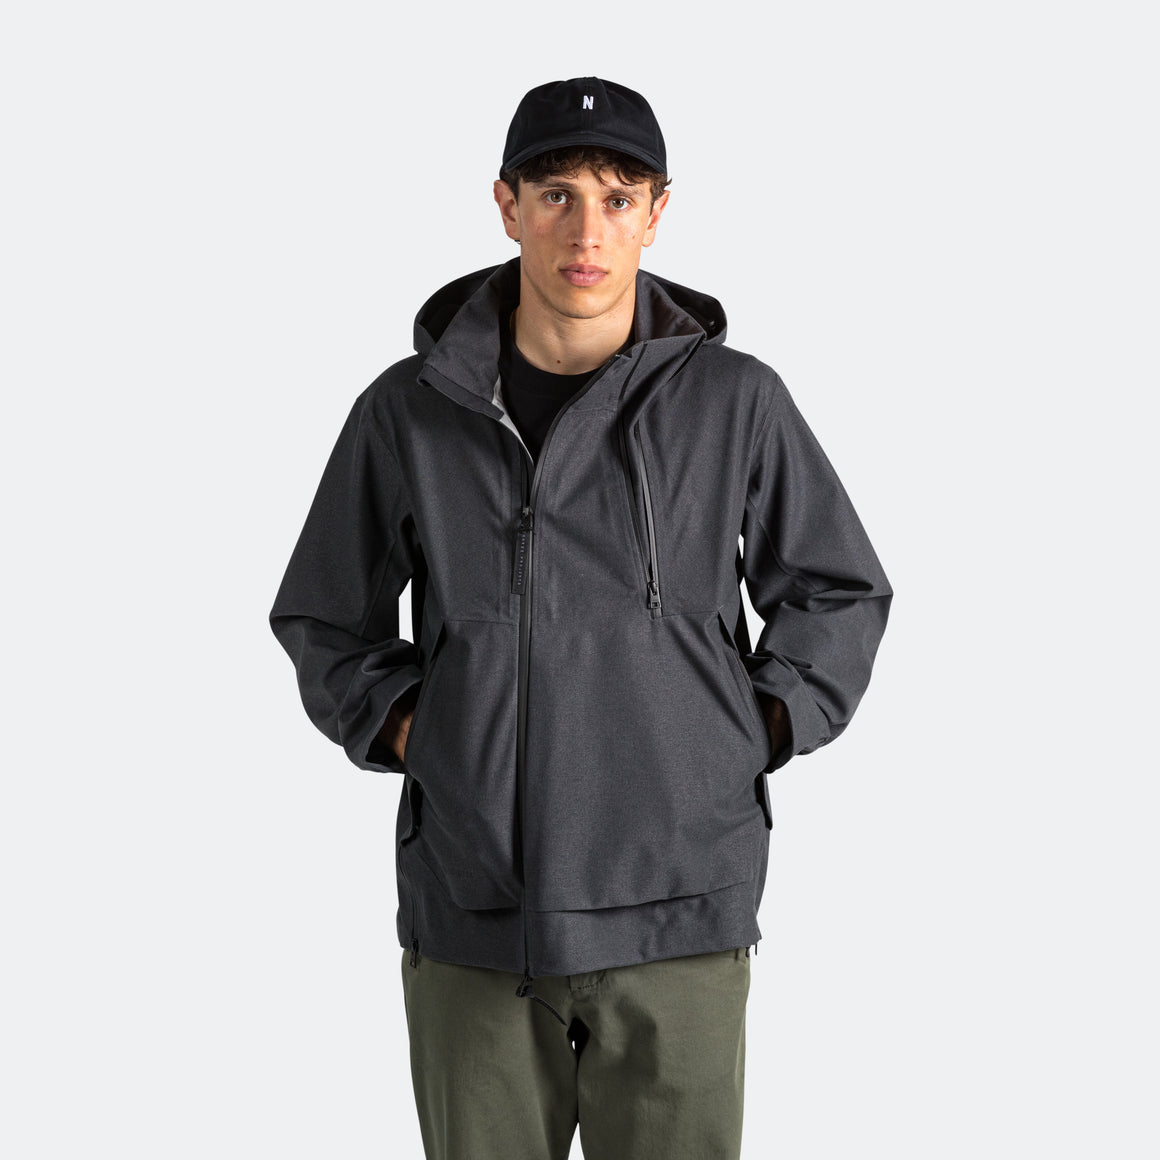 Textured Twill GORE-TEX® 3L Stand Collar Jacket - Charcoal Grey